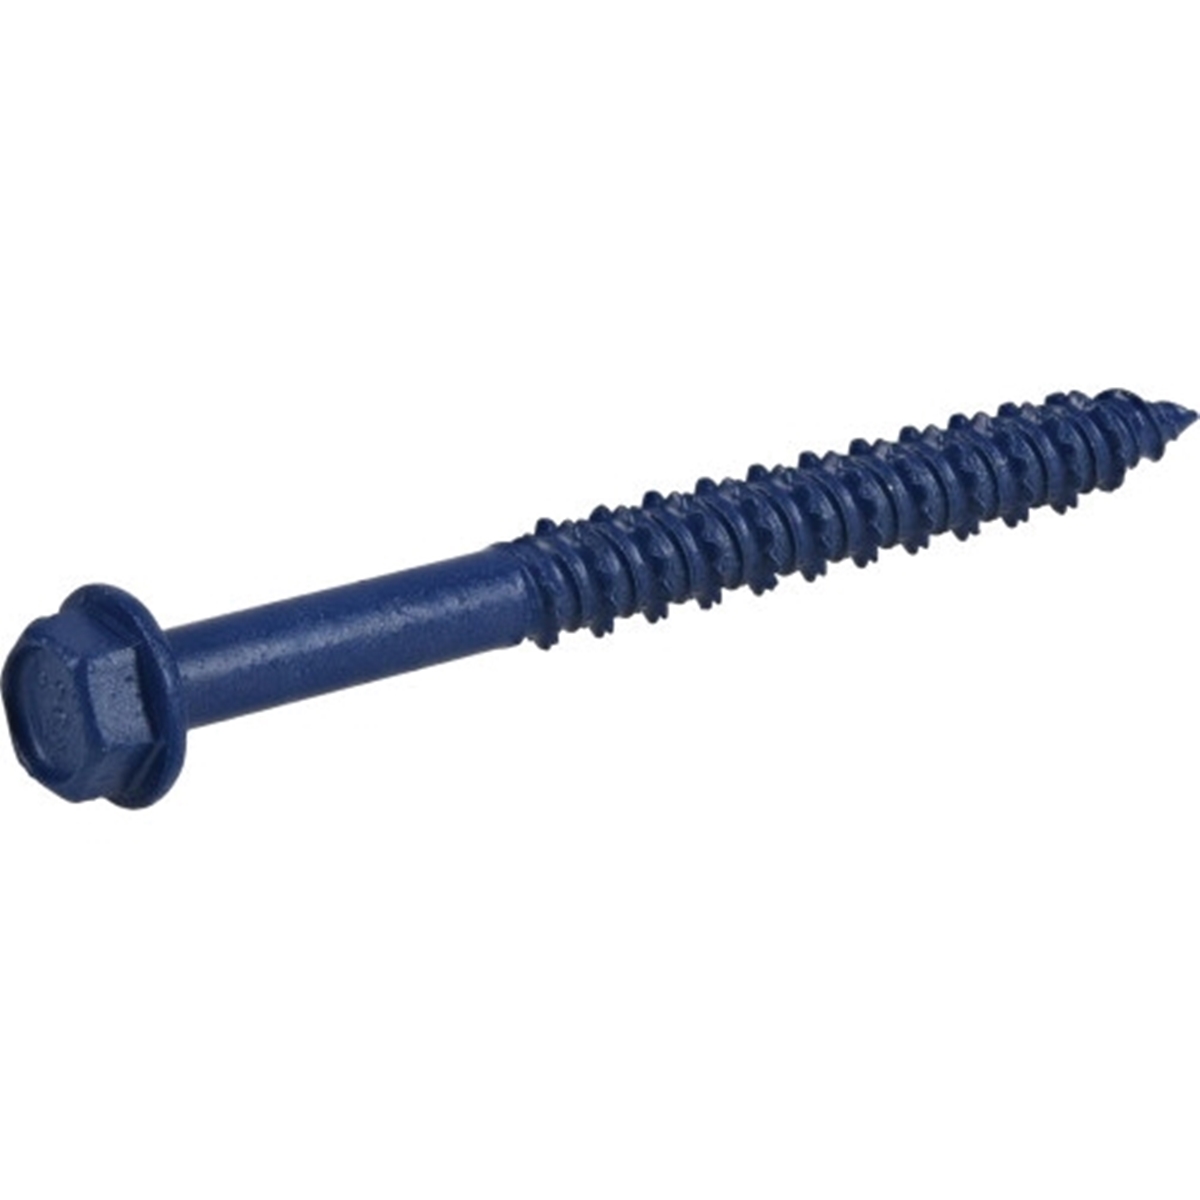 376511 Concrete Screw Anchor, 1/4 in Dia, 2-3/4 in L, Carbon Steel, Epoxy-Coated, 100/PK